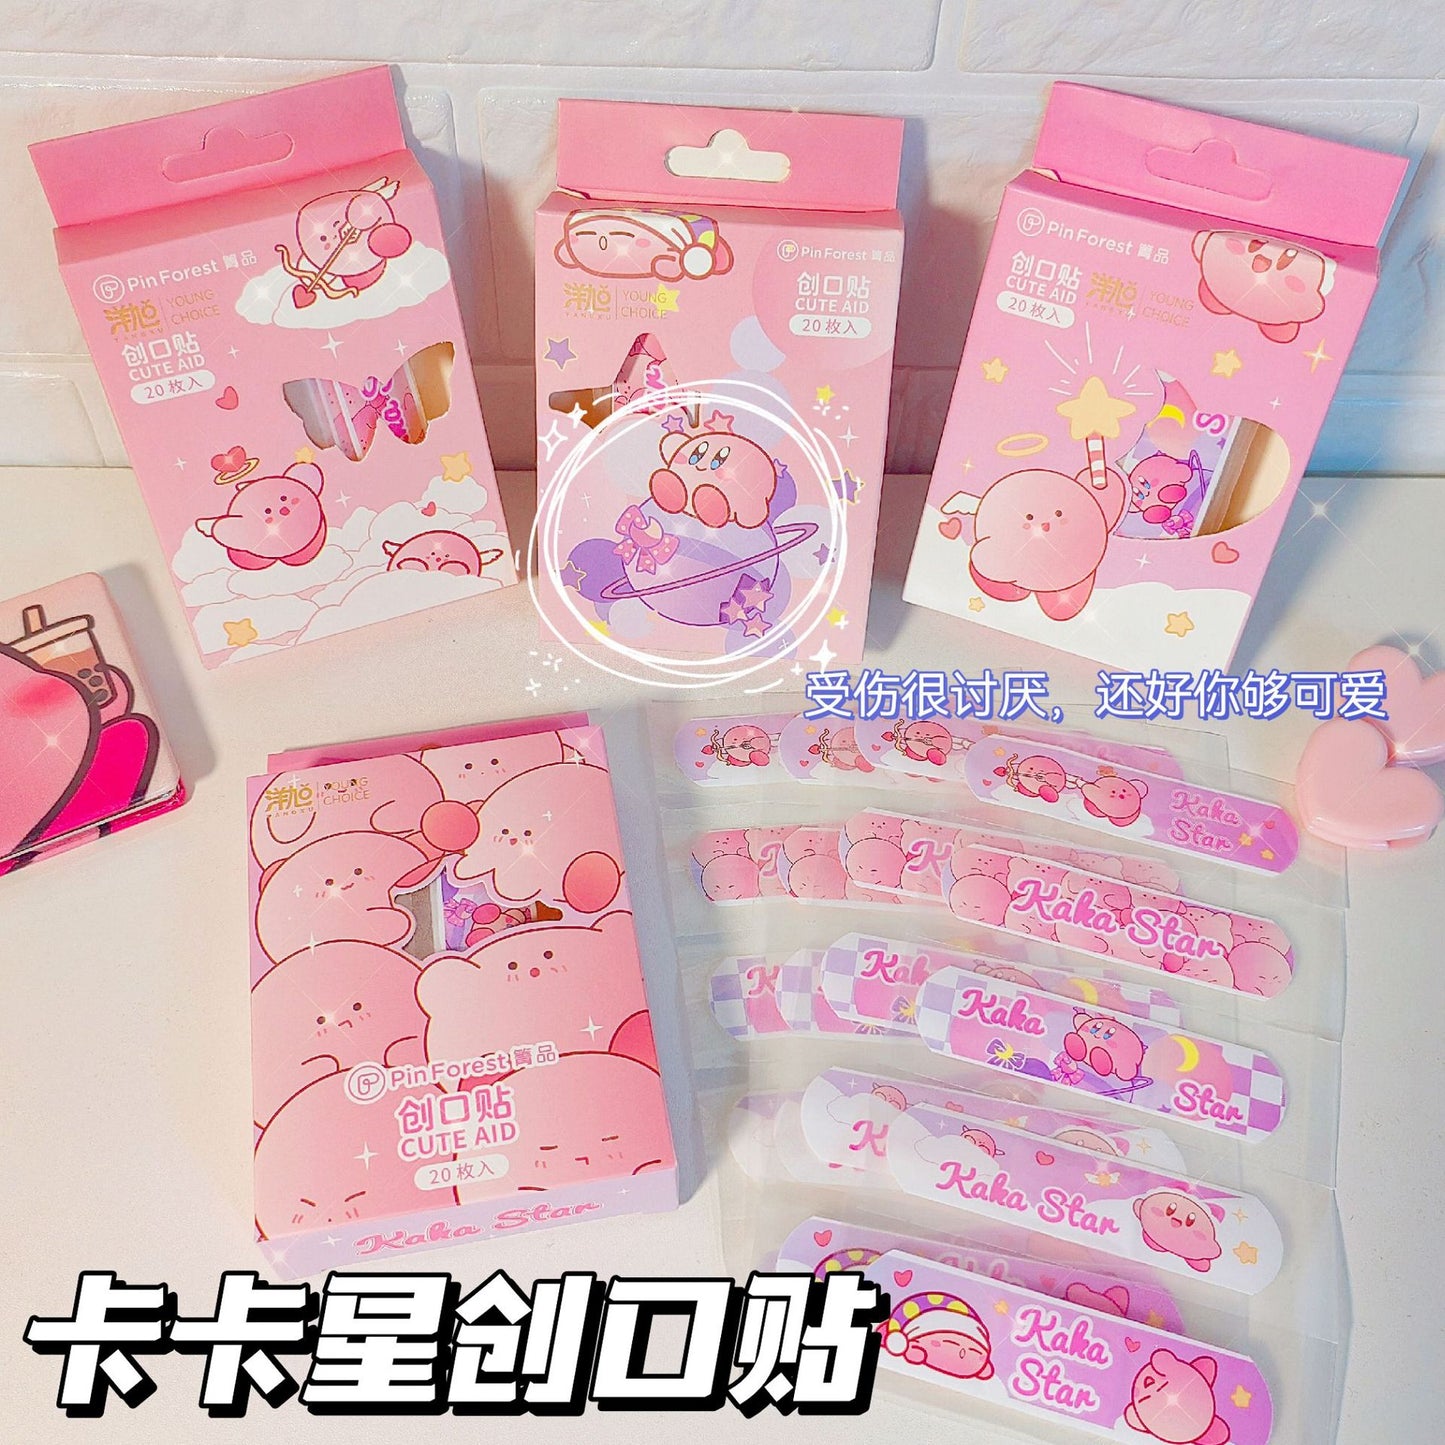 Sanrio and Kirby Bandages